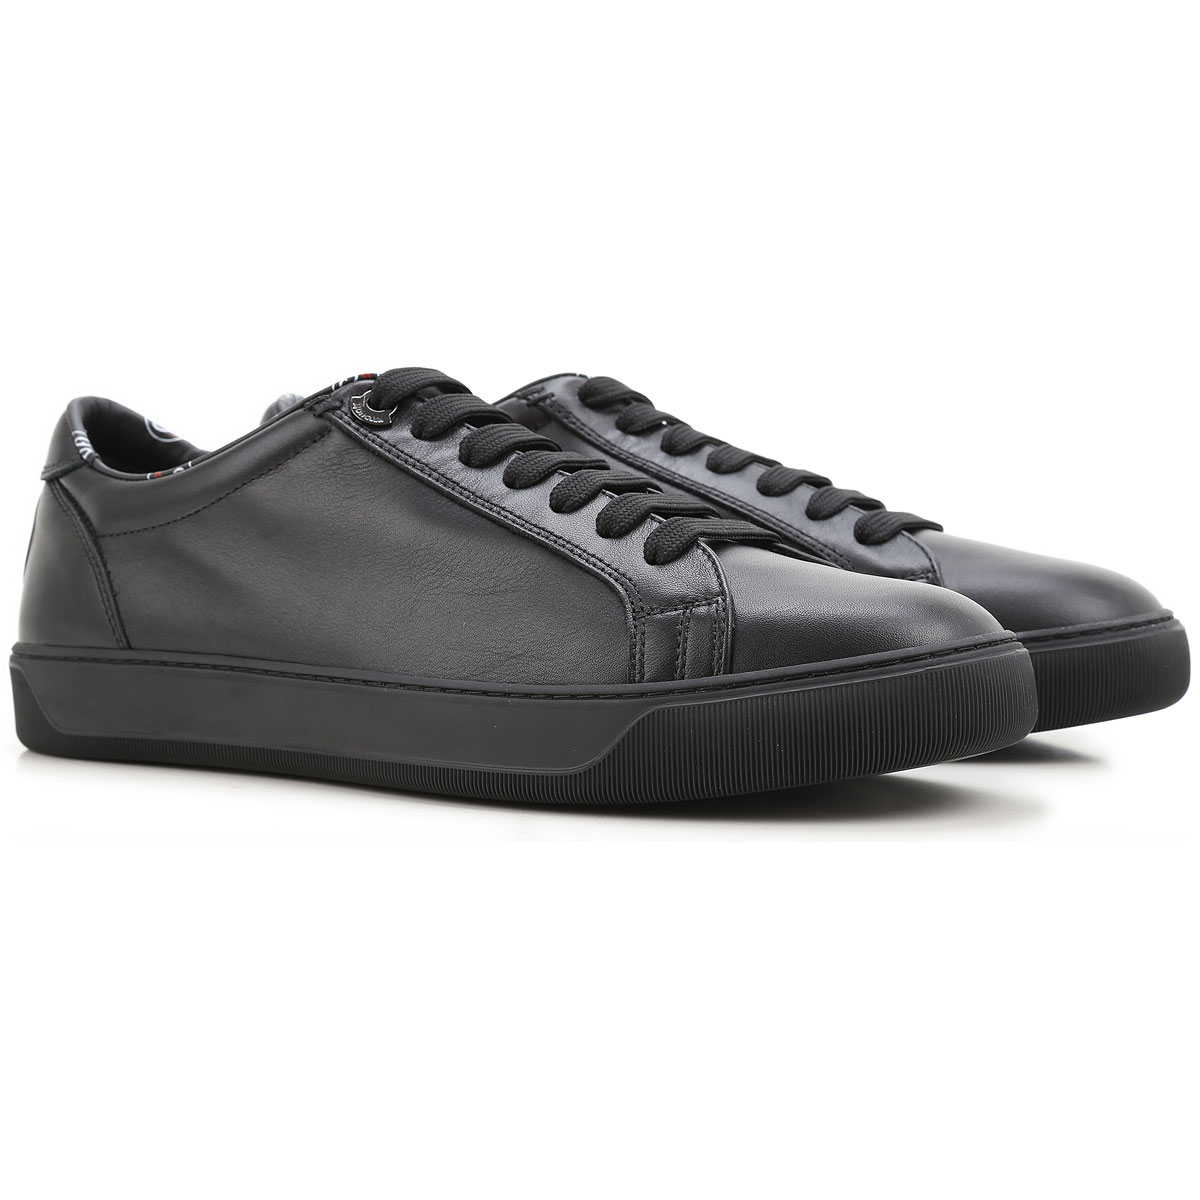 Mens Shoes Moncler, Style code 004085007504999